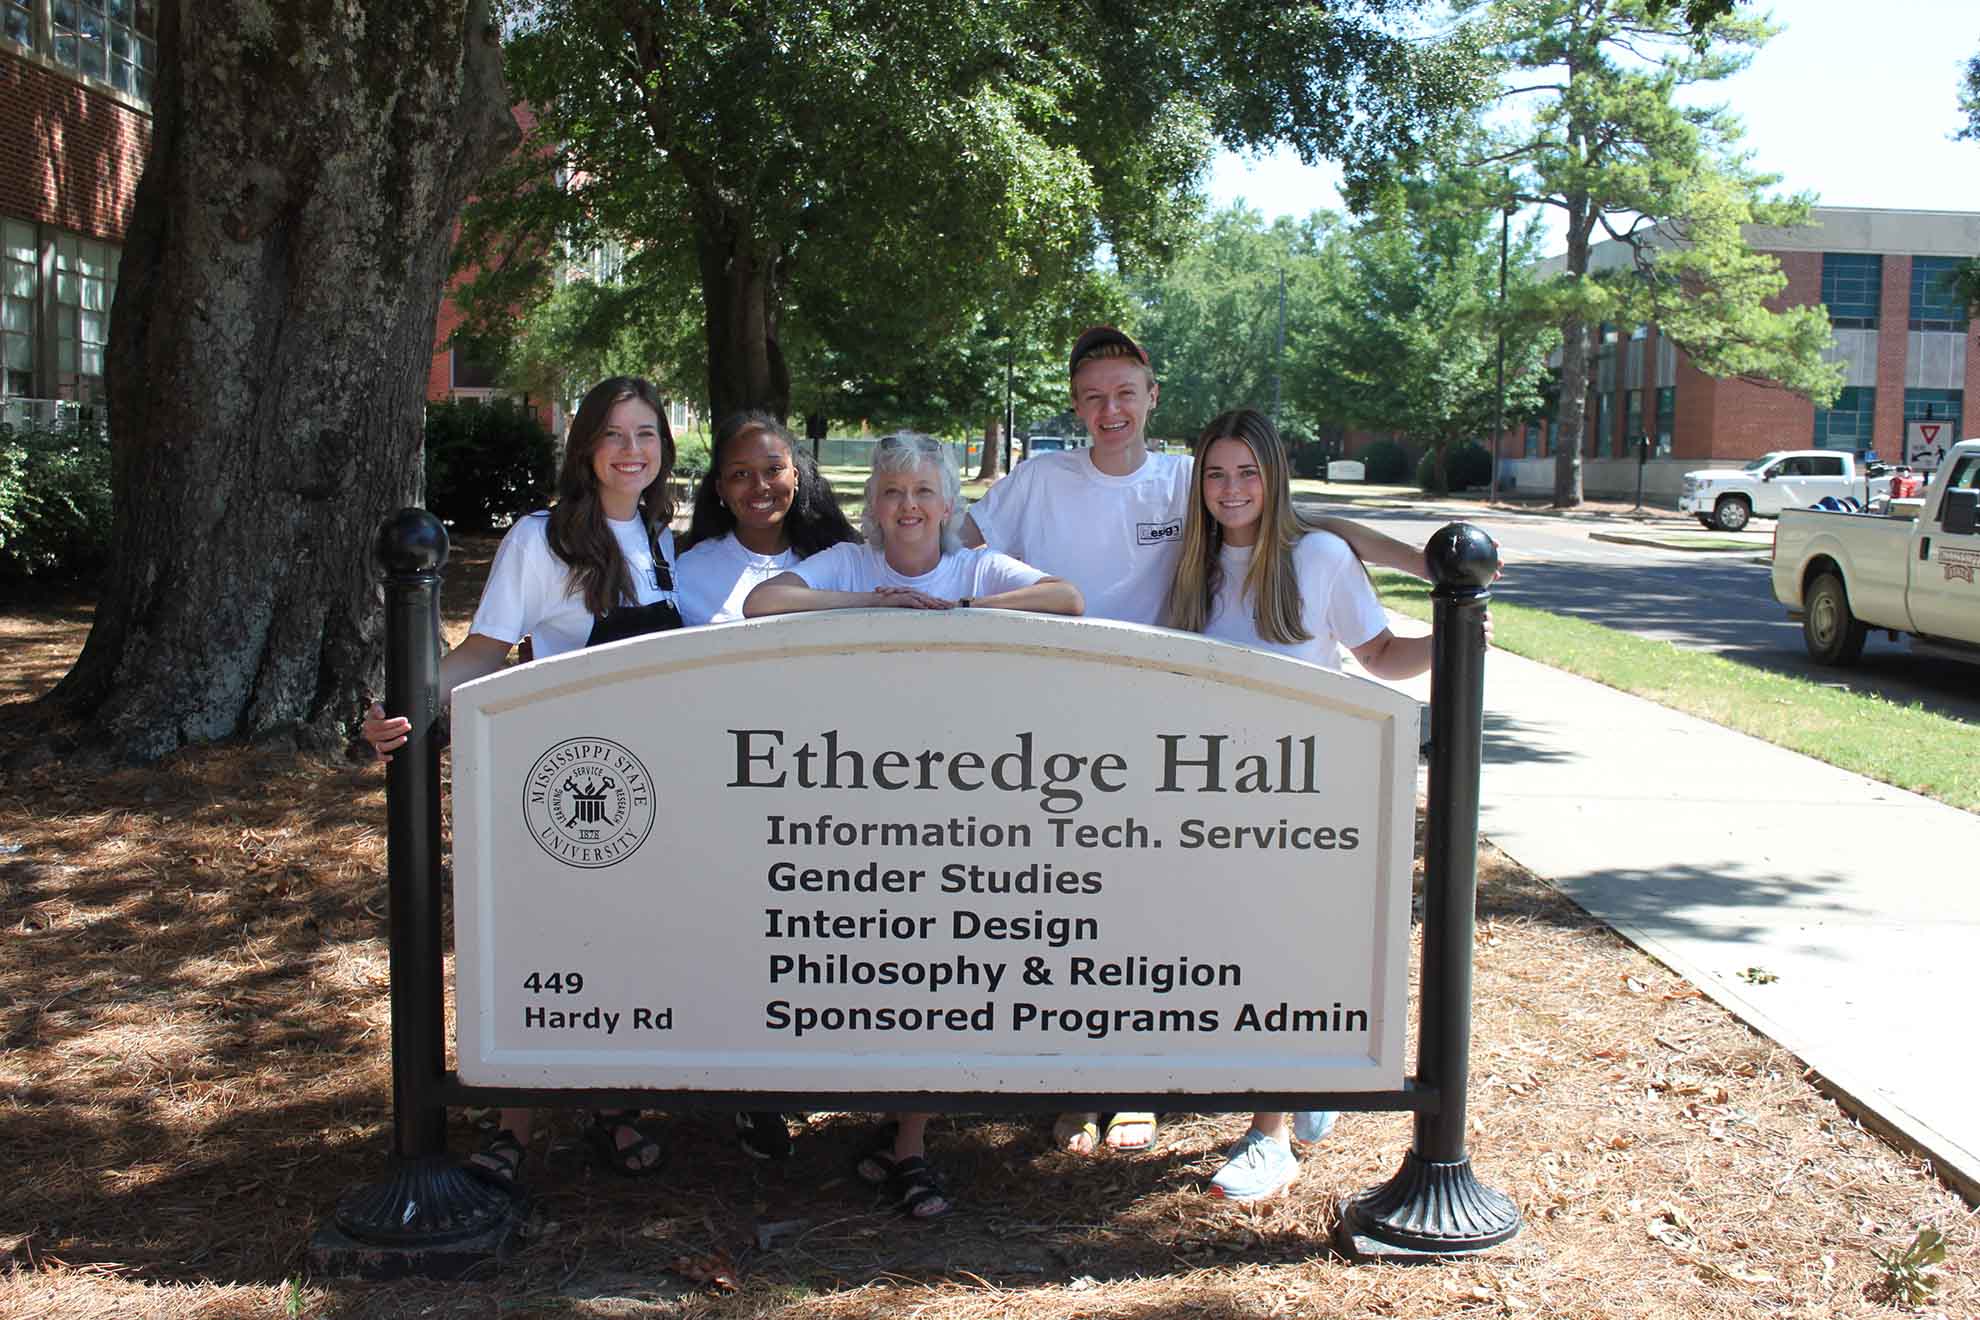 The campers take a picture with the Etheredge sign.